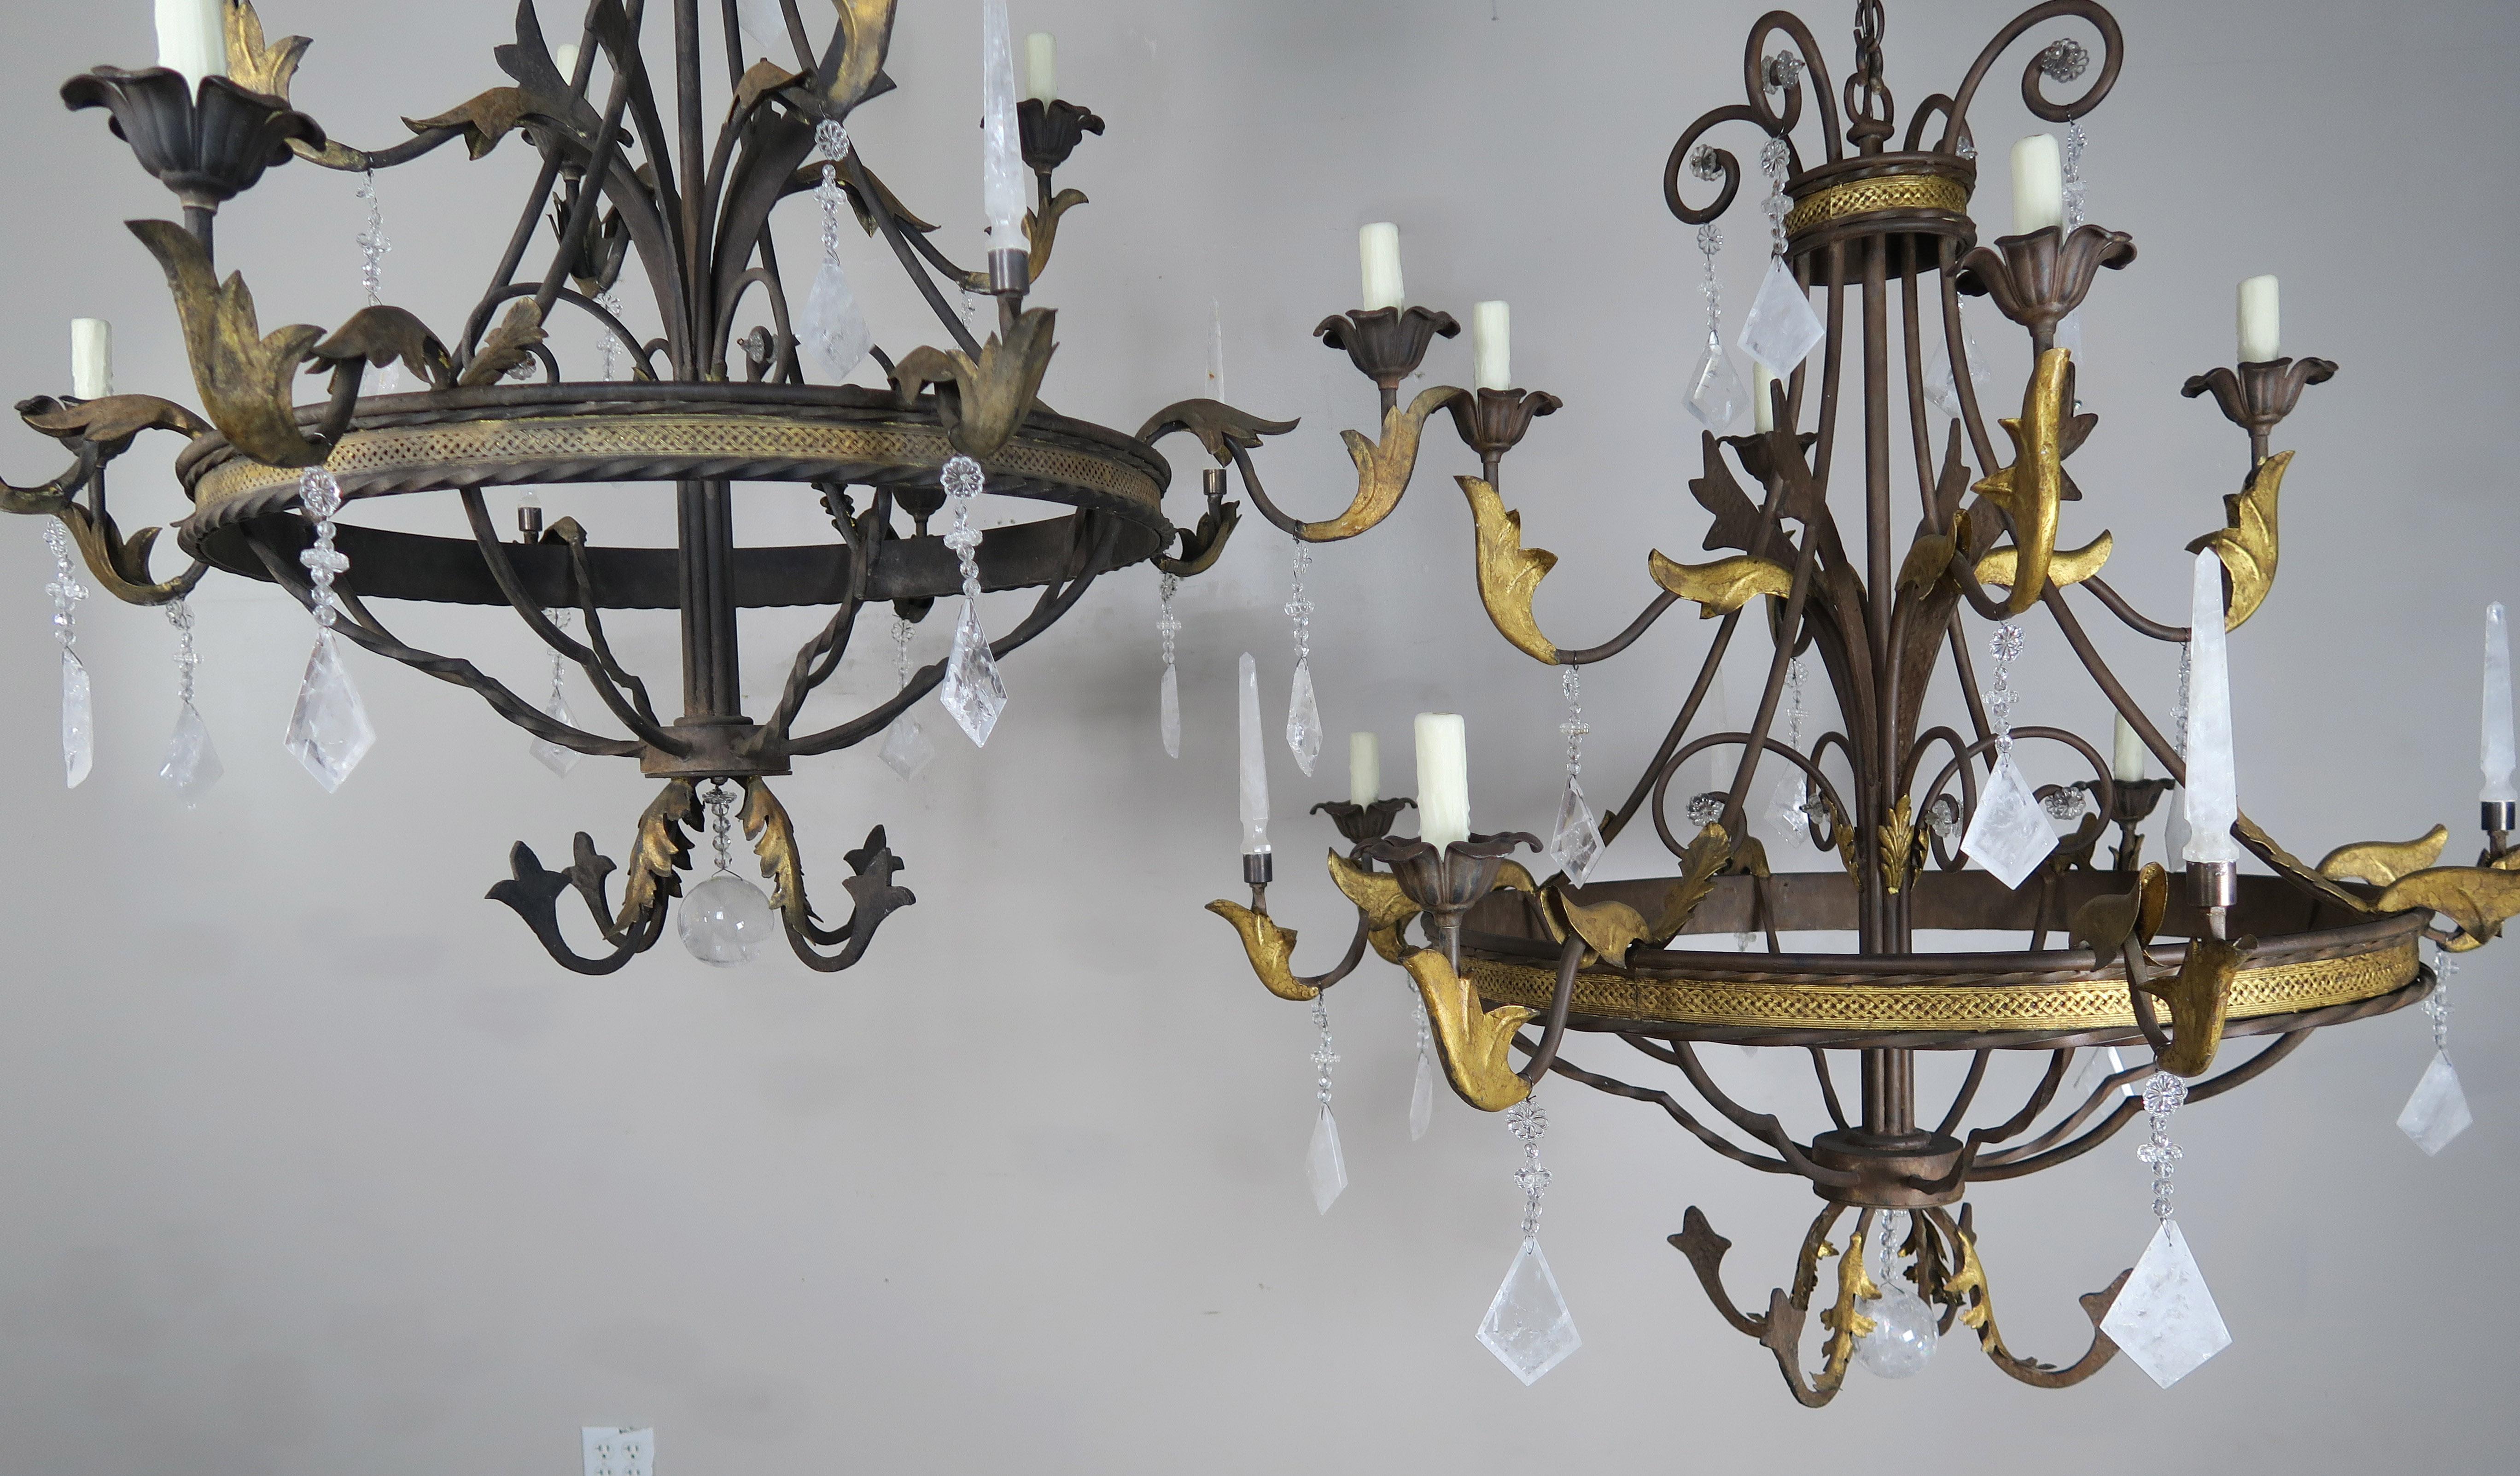 Wrought Iron 8-Light Spanish Baroque Style Rock Crystal Chandeliers, Pair